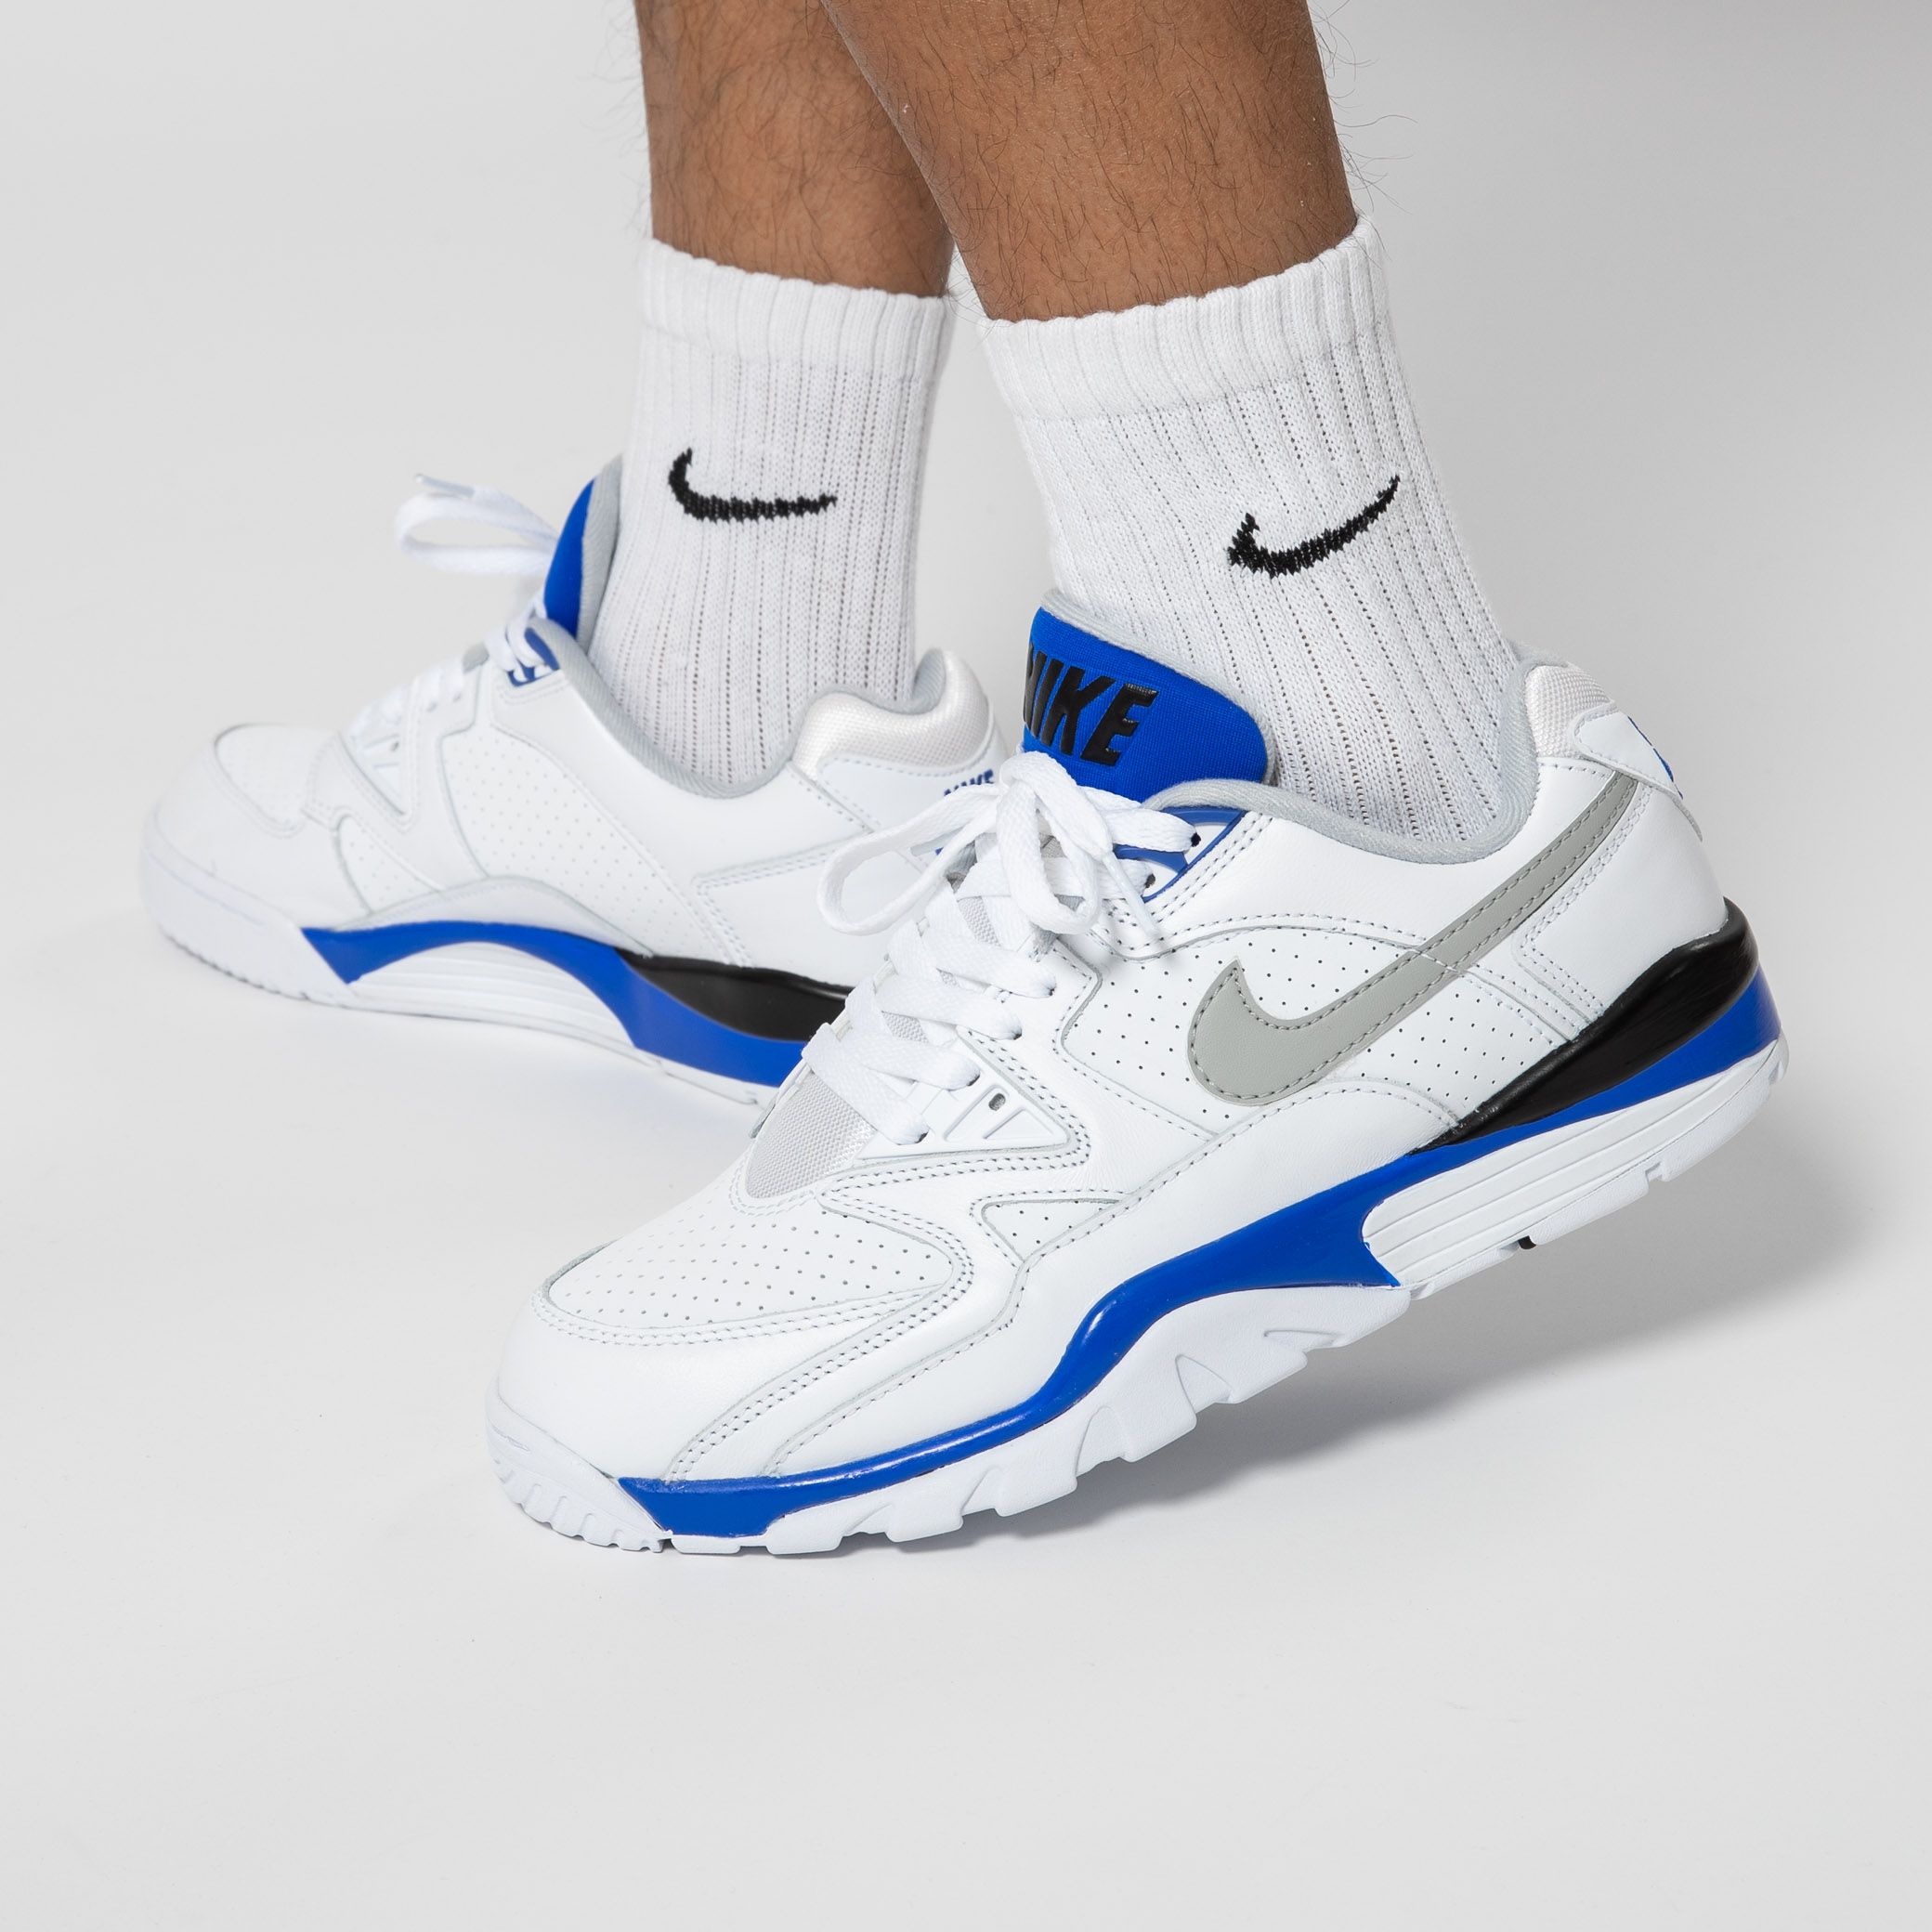 Titolo on Twitter: "born with the fitness boom in the 80s ⚪️ the Nike Air Cross Trainer 3 Low is now available in Neptune Green and Racer Blue shop ➡️ https://t.co/lUiHwjHpeZ